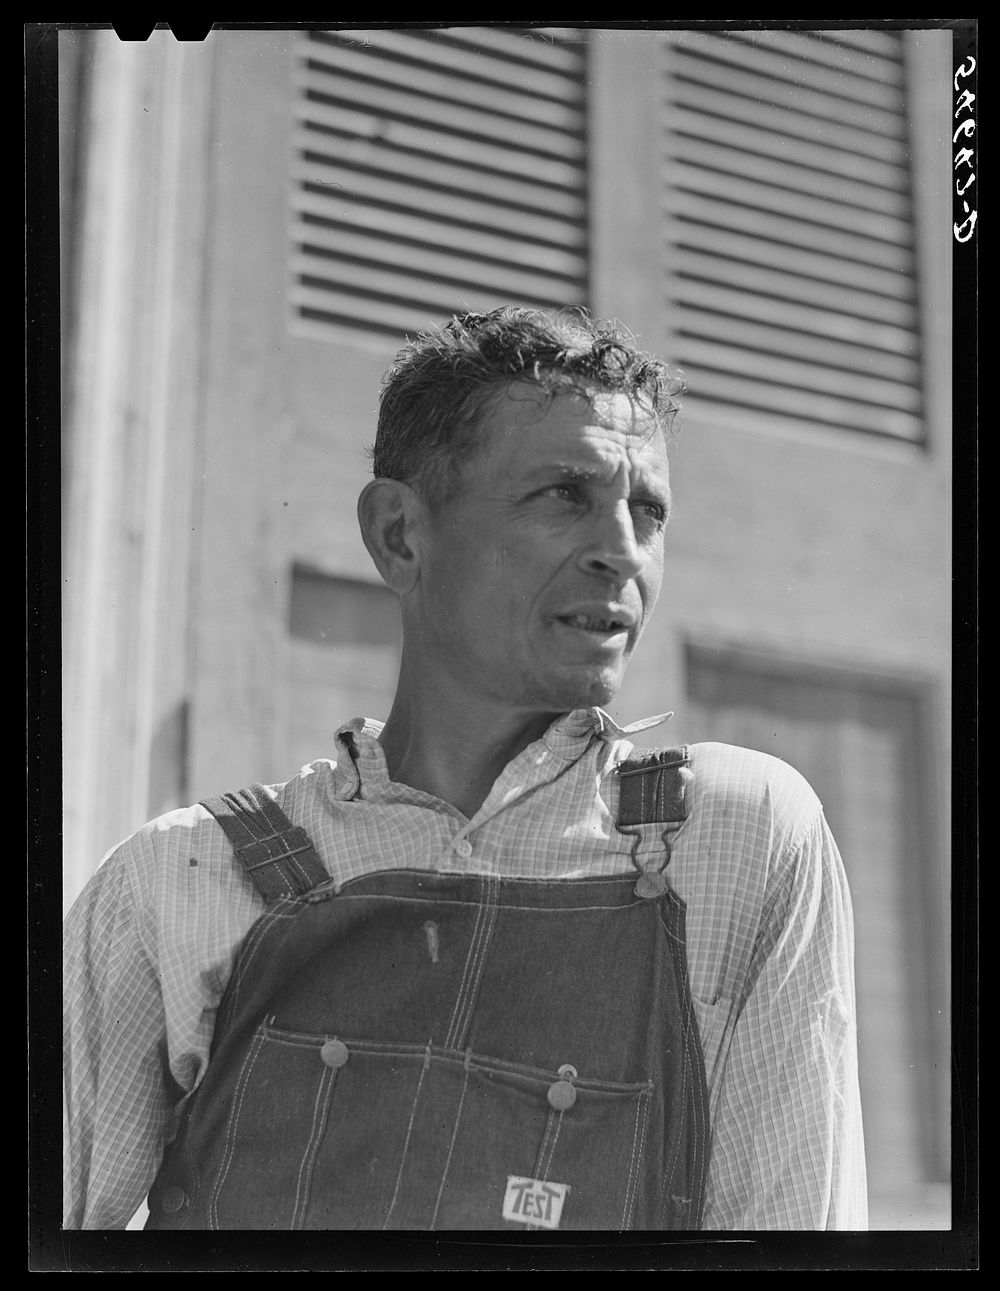 [Untitled photo, possibly related to: Melrose, Natchitoches Parish, Louisiana. Mulatto servant on John Henry cotton…